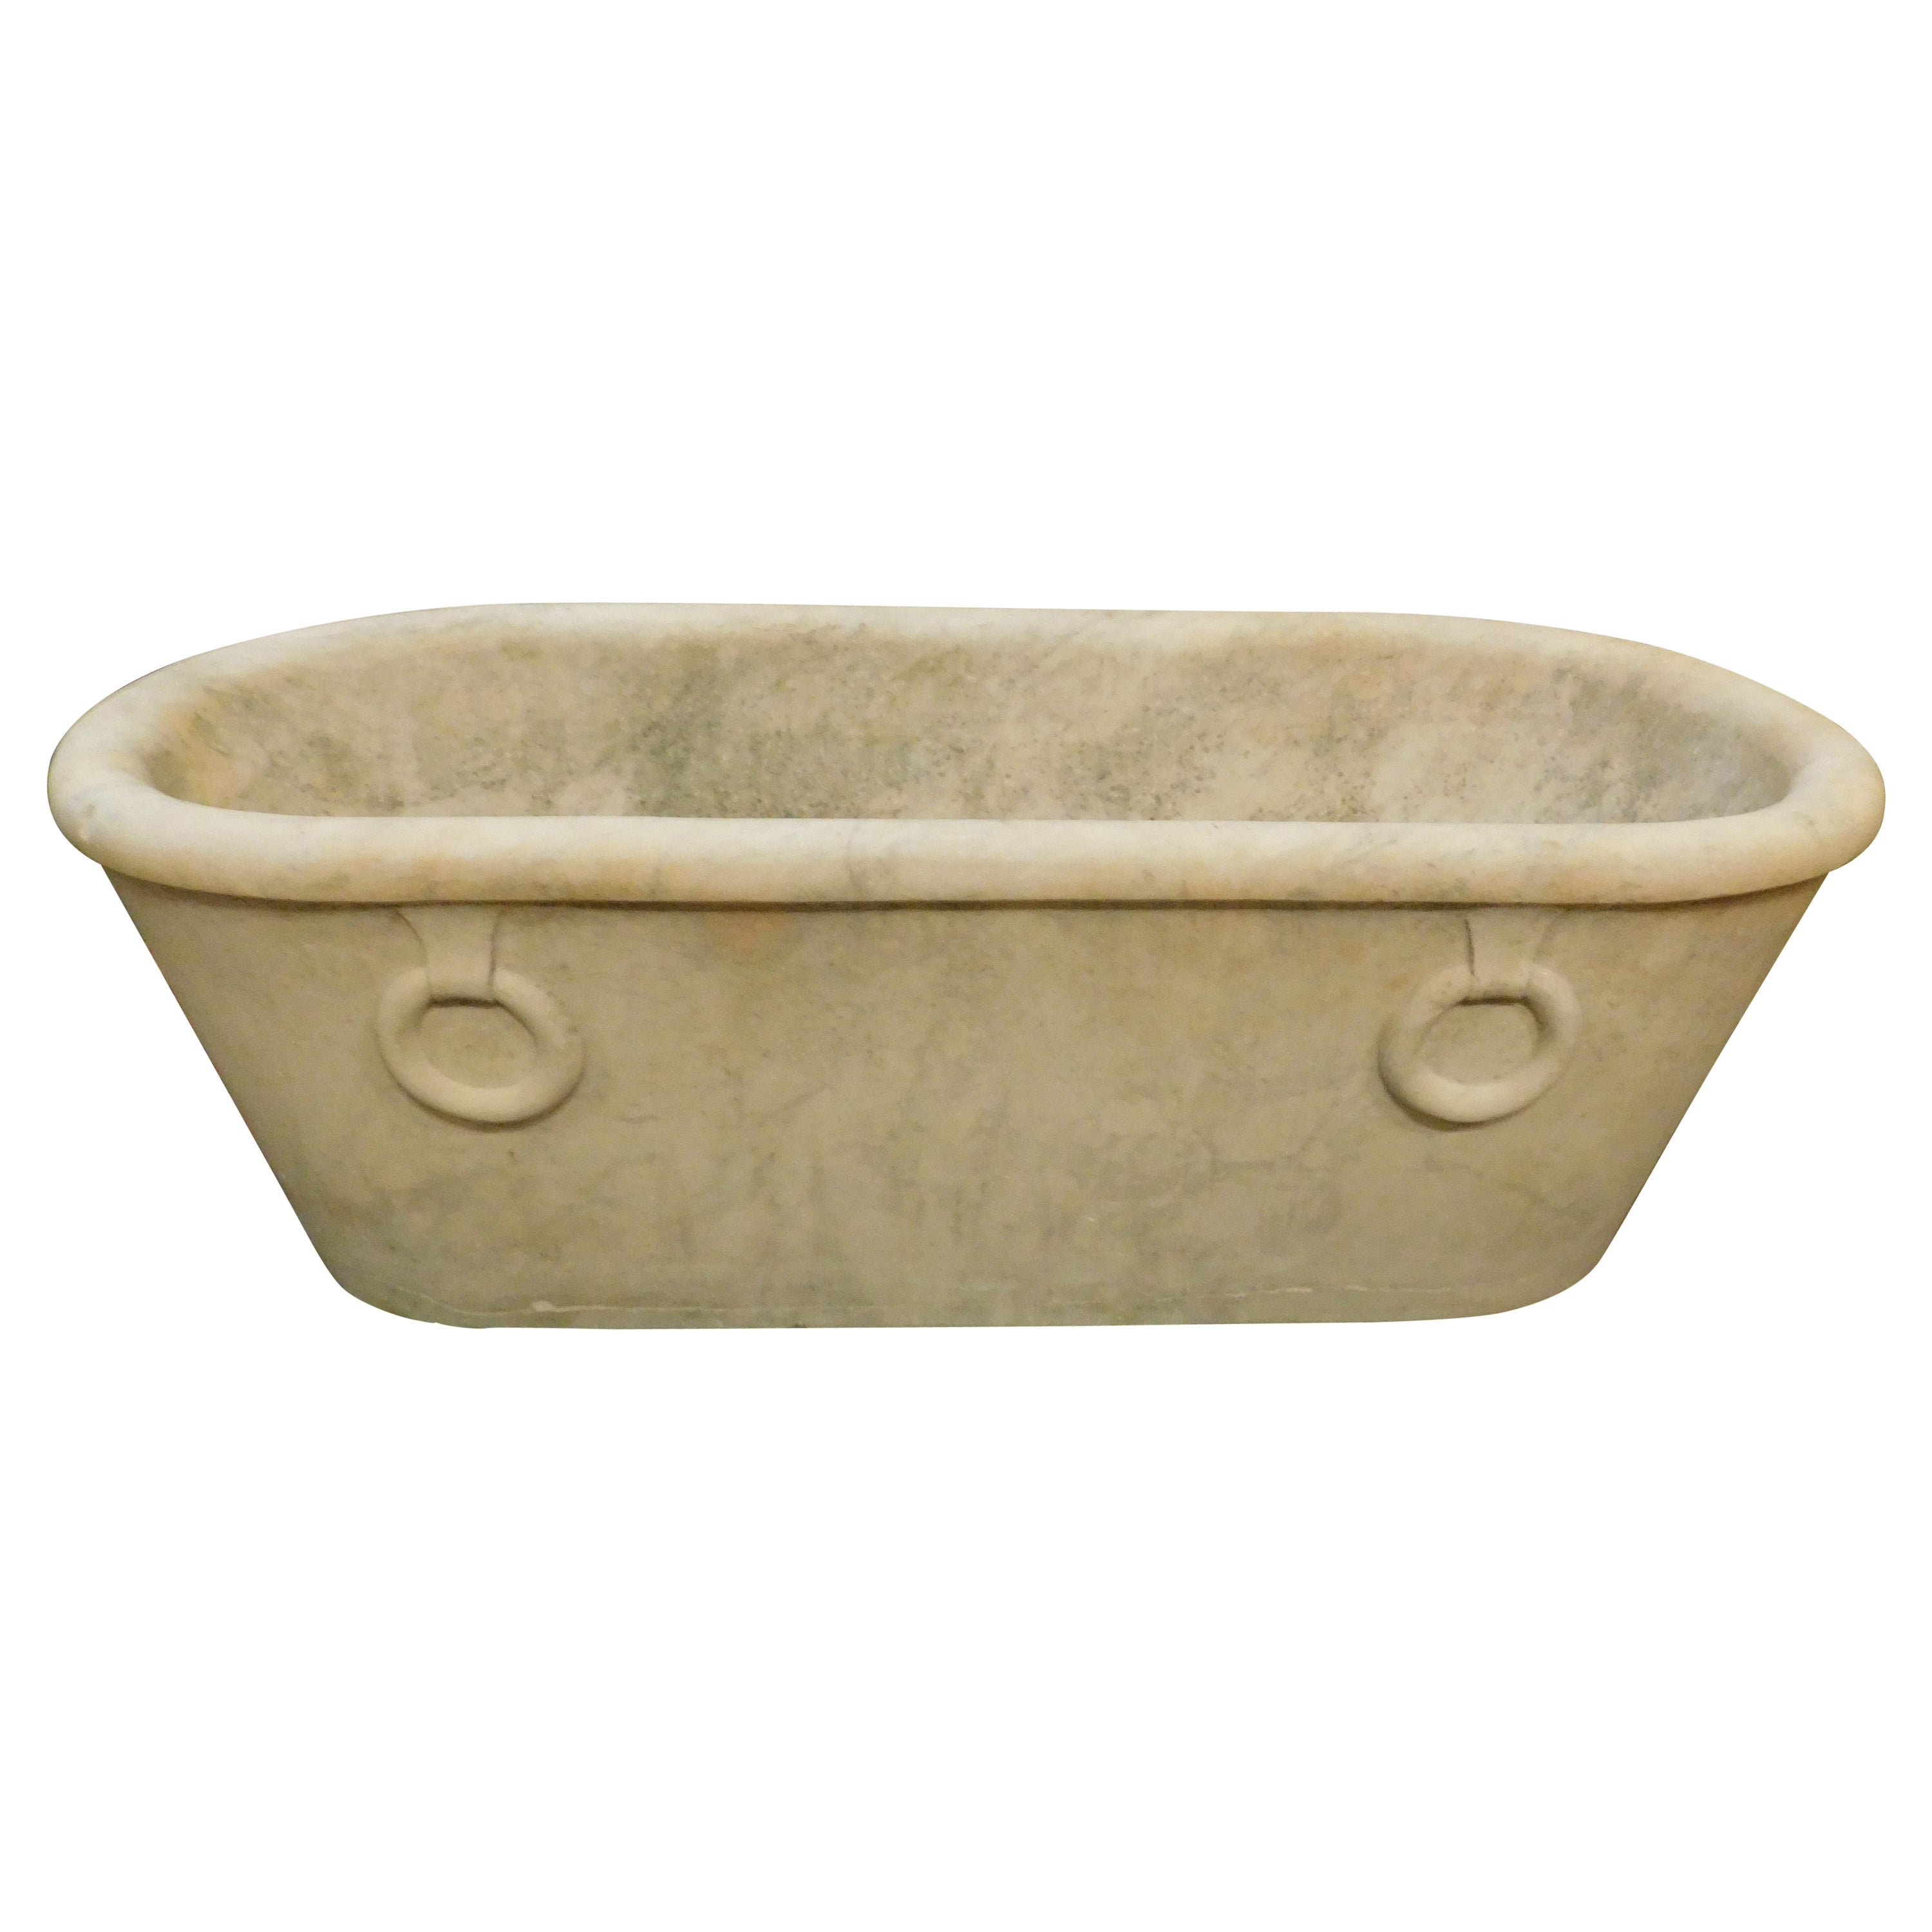 Antique Tub in White Marble, Sculpted, 19th Century Italy